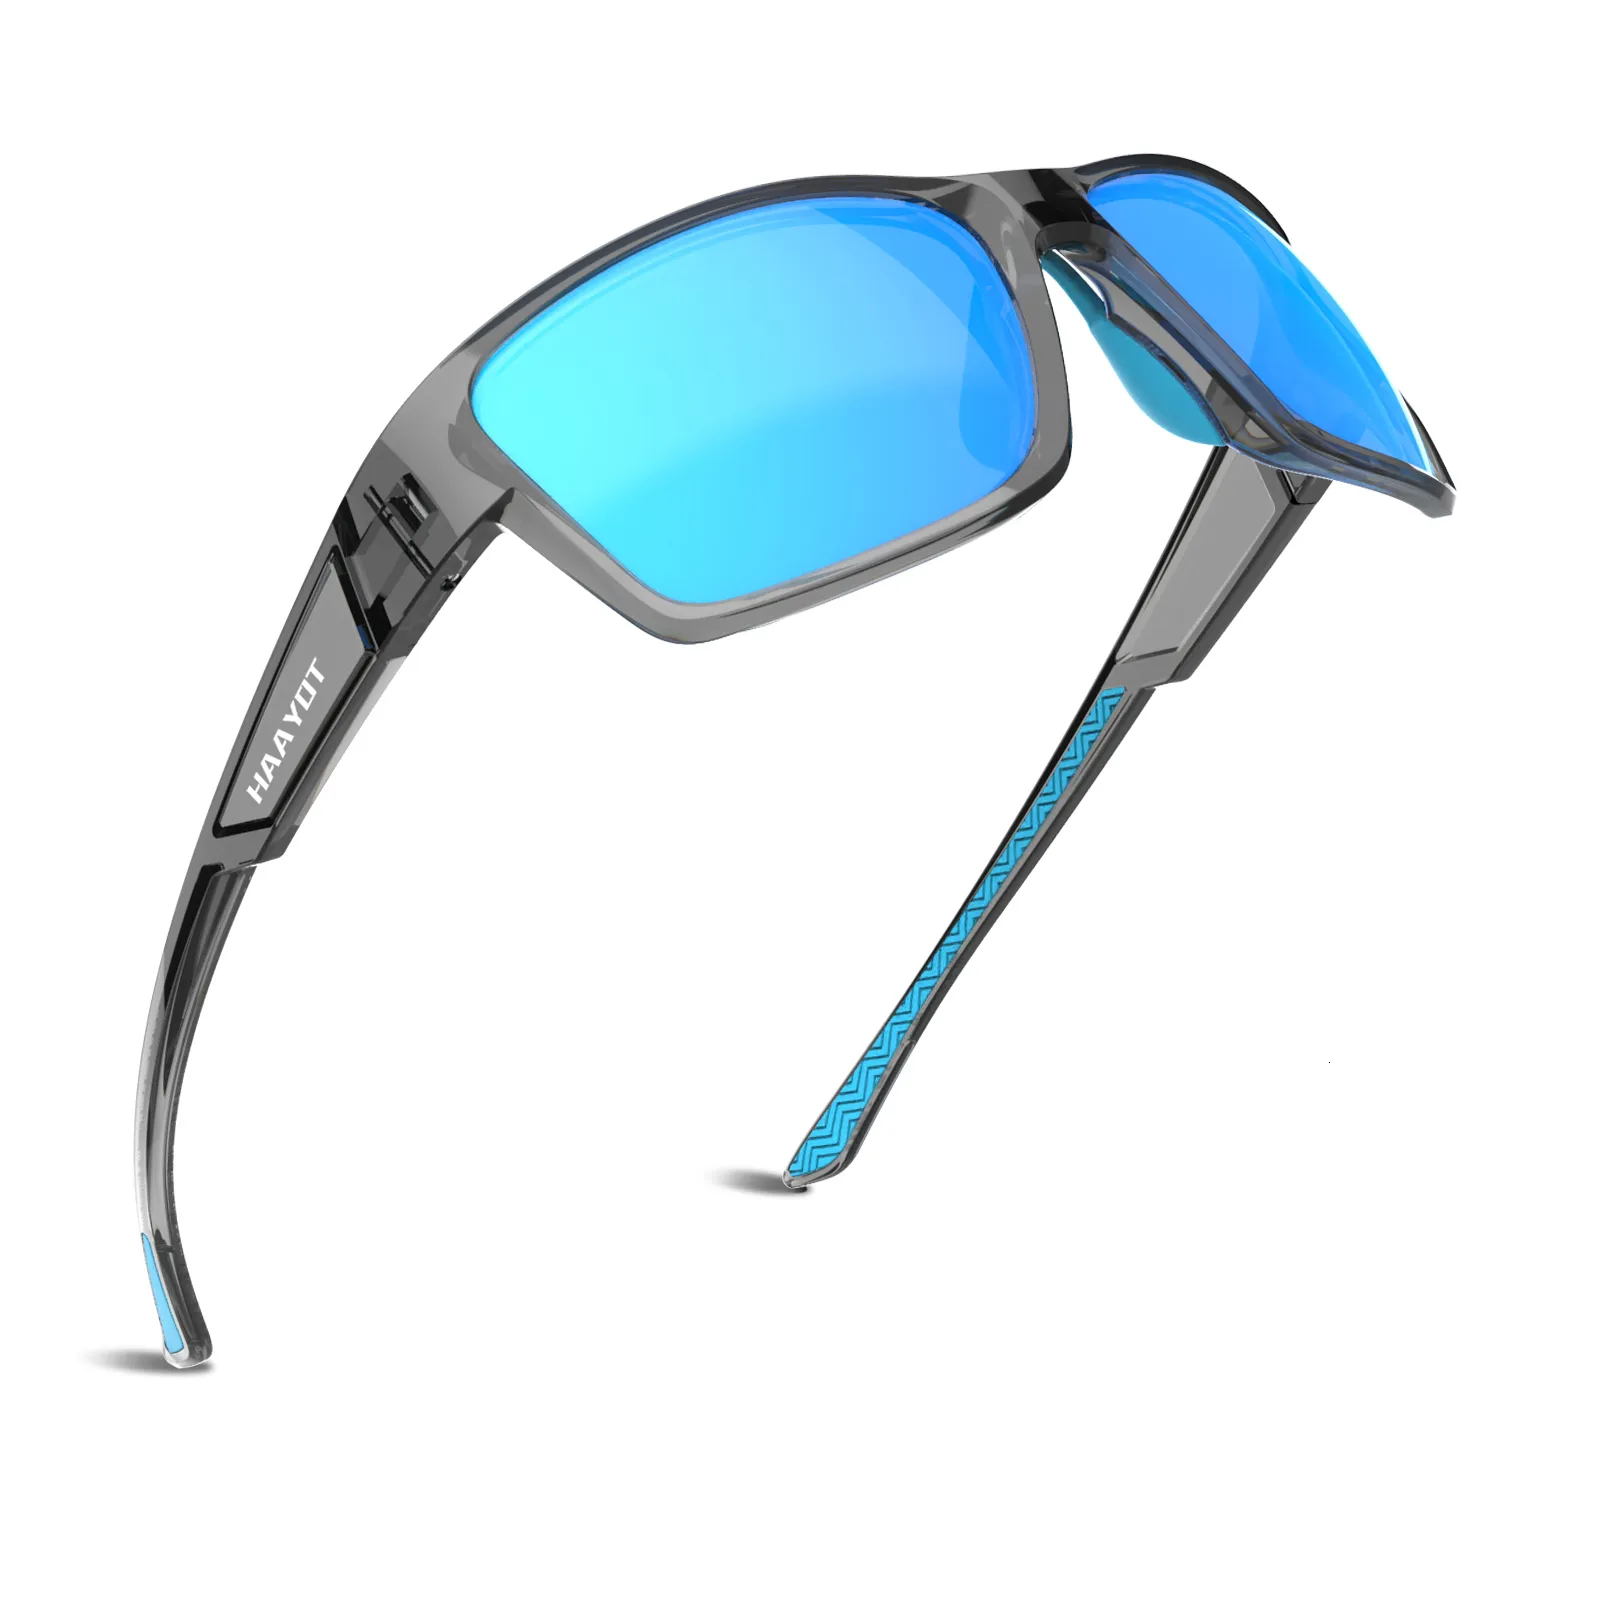 SUUKAAs Polarized Best Fishing Sunglasses For Men Ideal For Fishing,  Camping, Driving, Surfing And Outdoor Sports From Huo06, $10.4